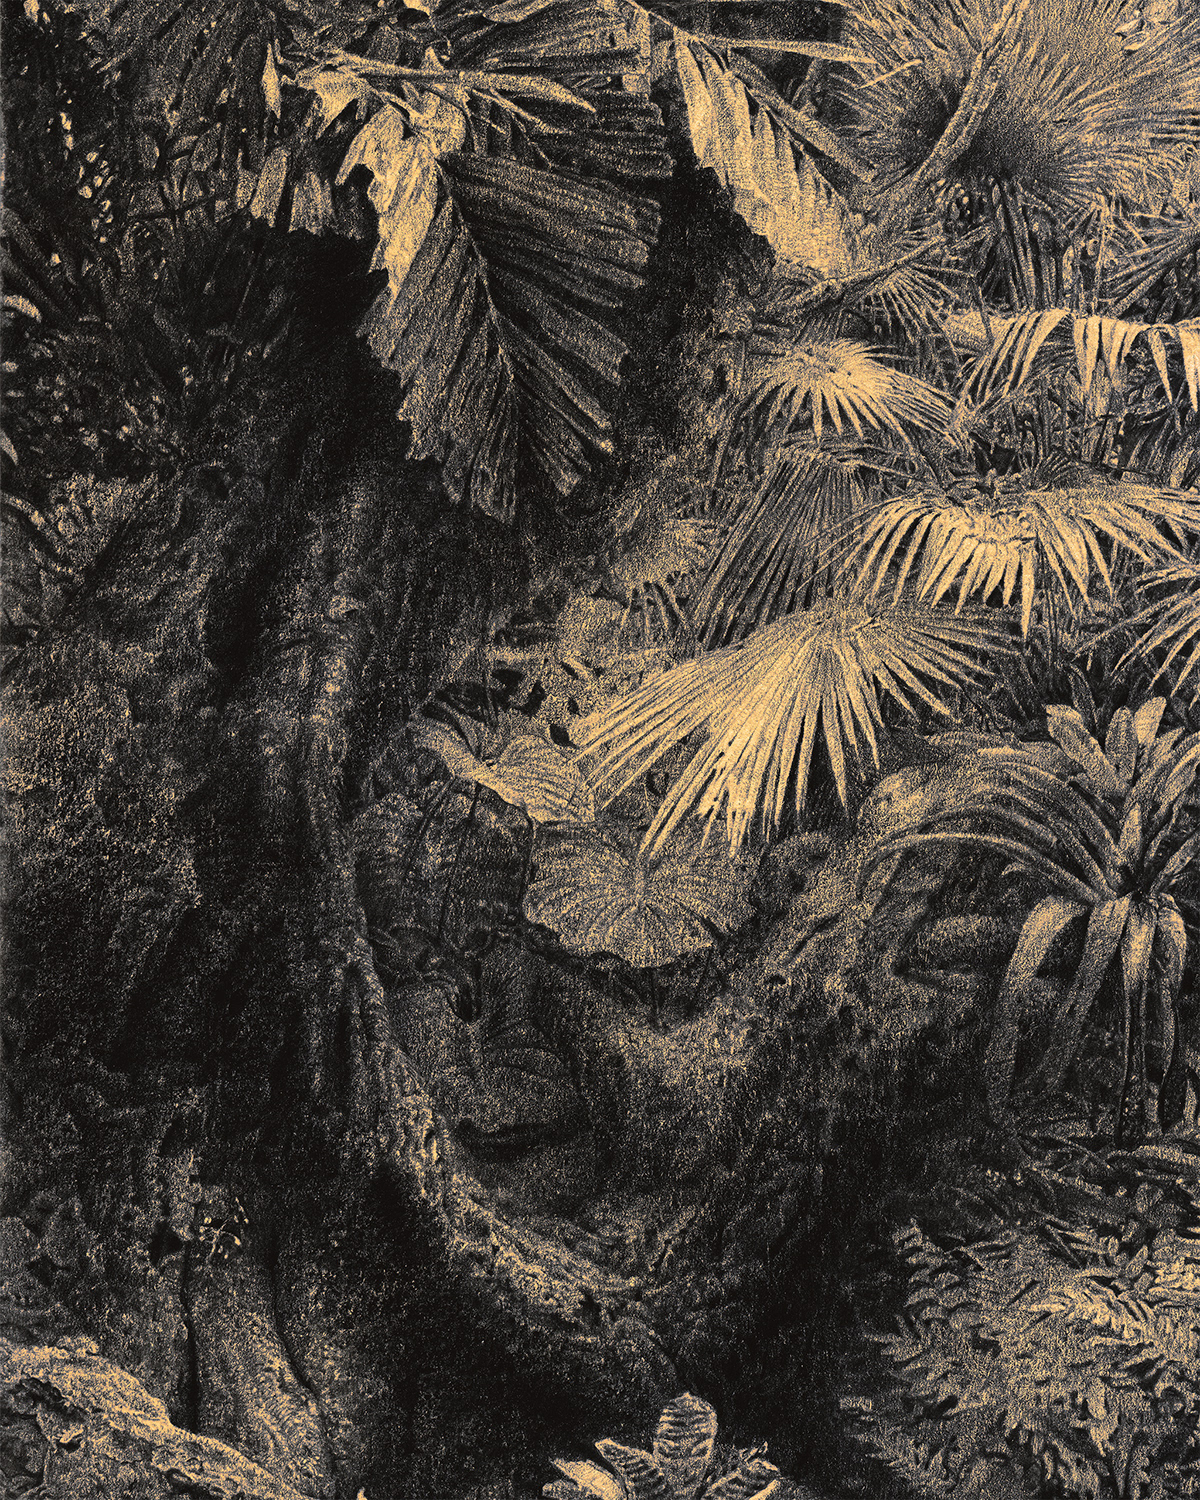 Drawing  forest ILLUSTRATION  jungle landscapes Nature pencil scenery Tropical watercolor